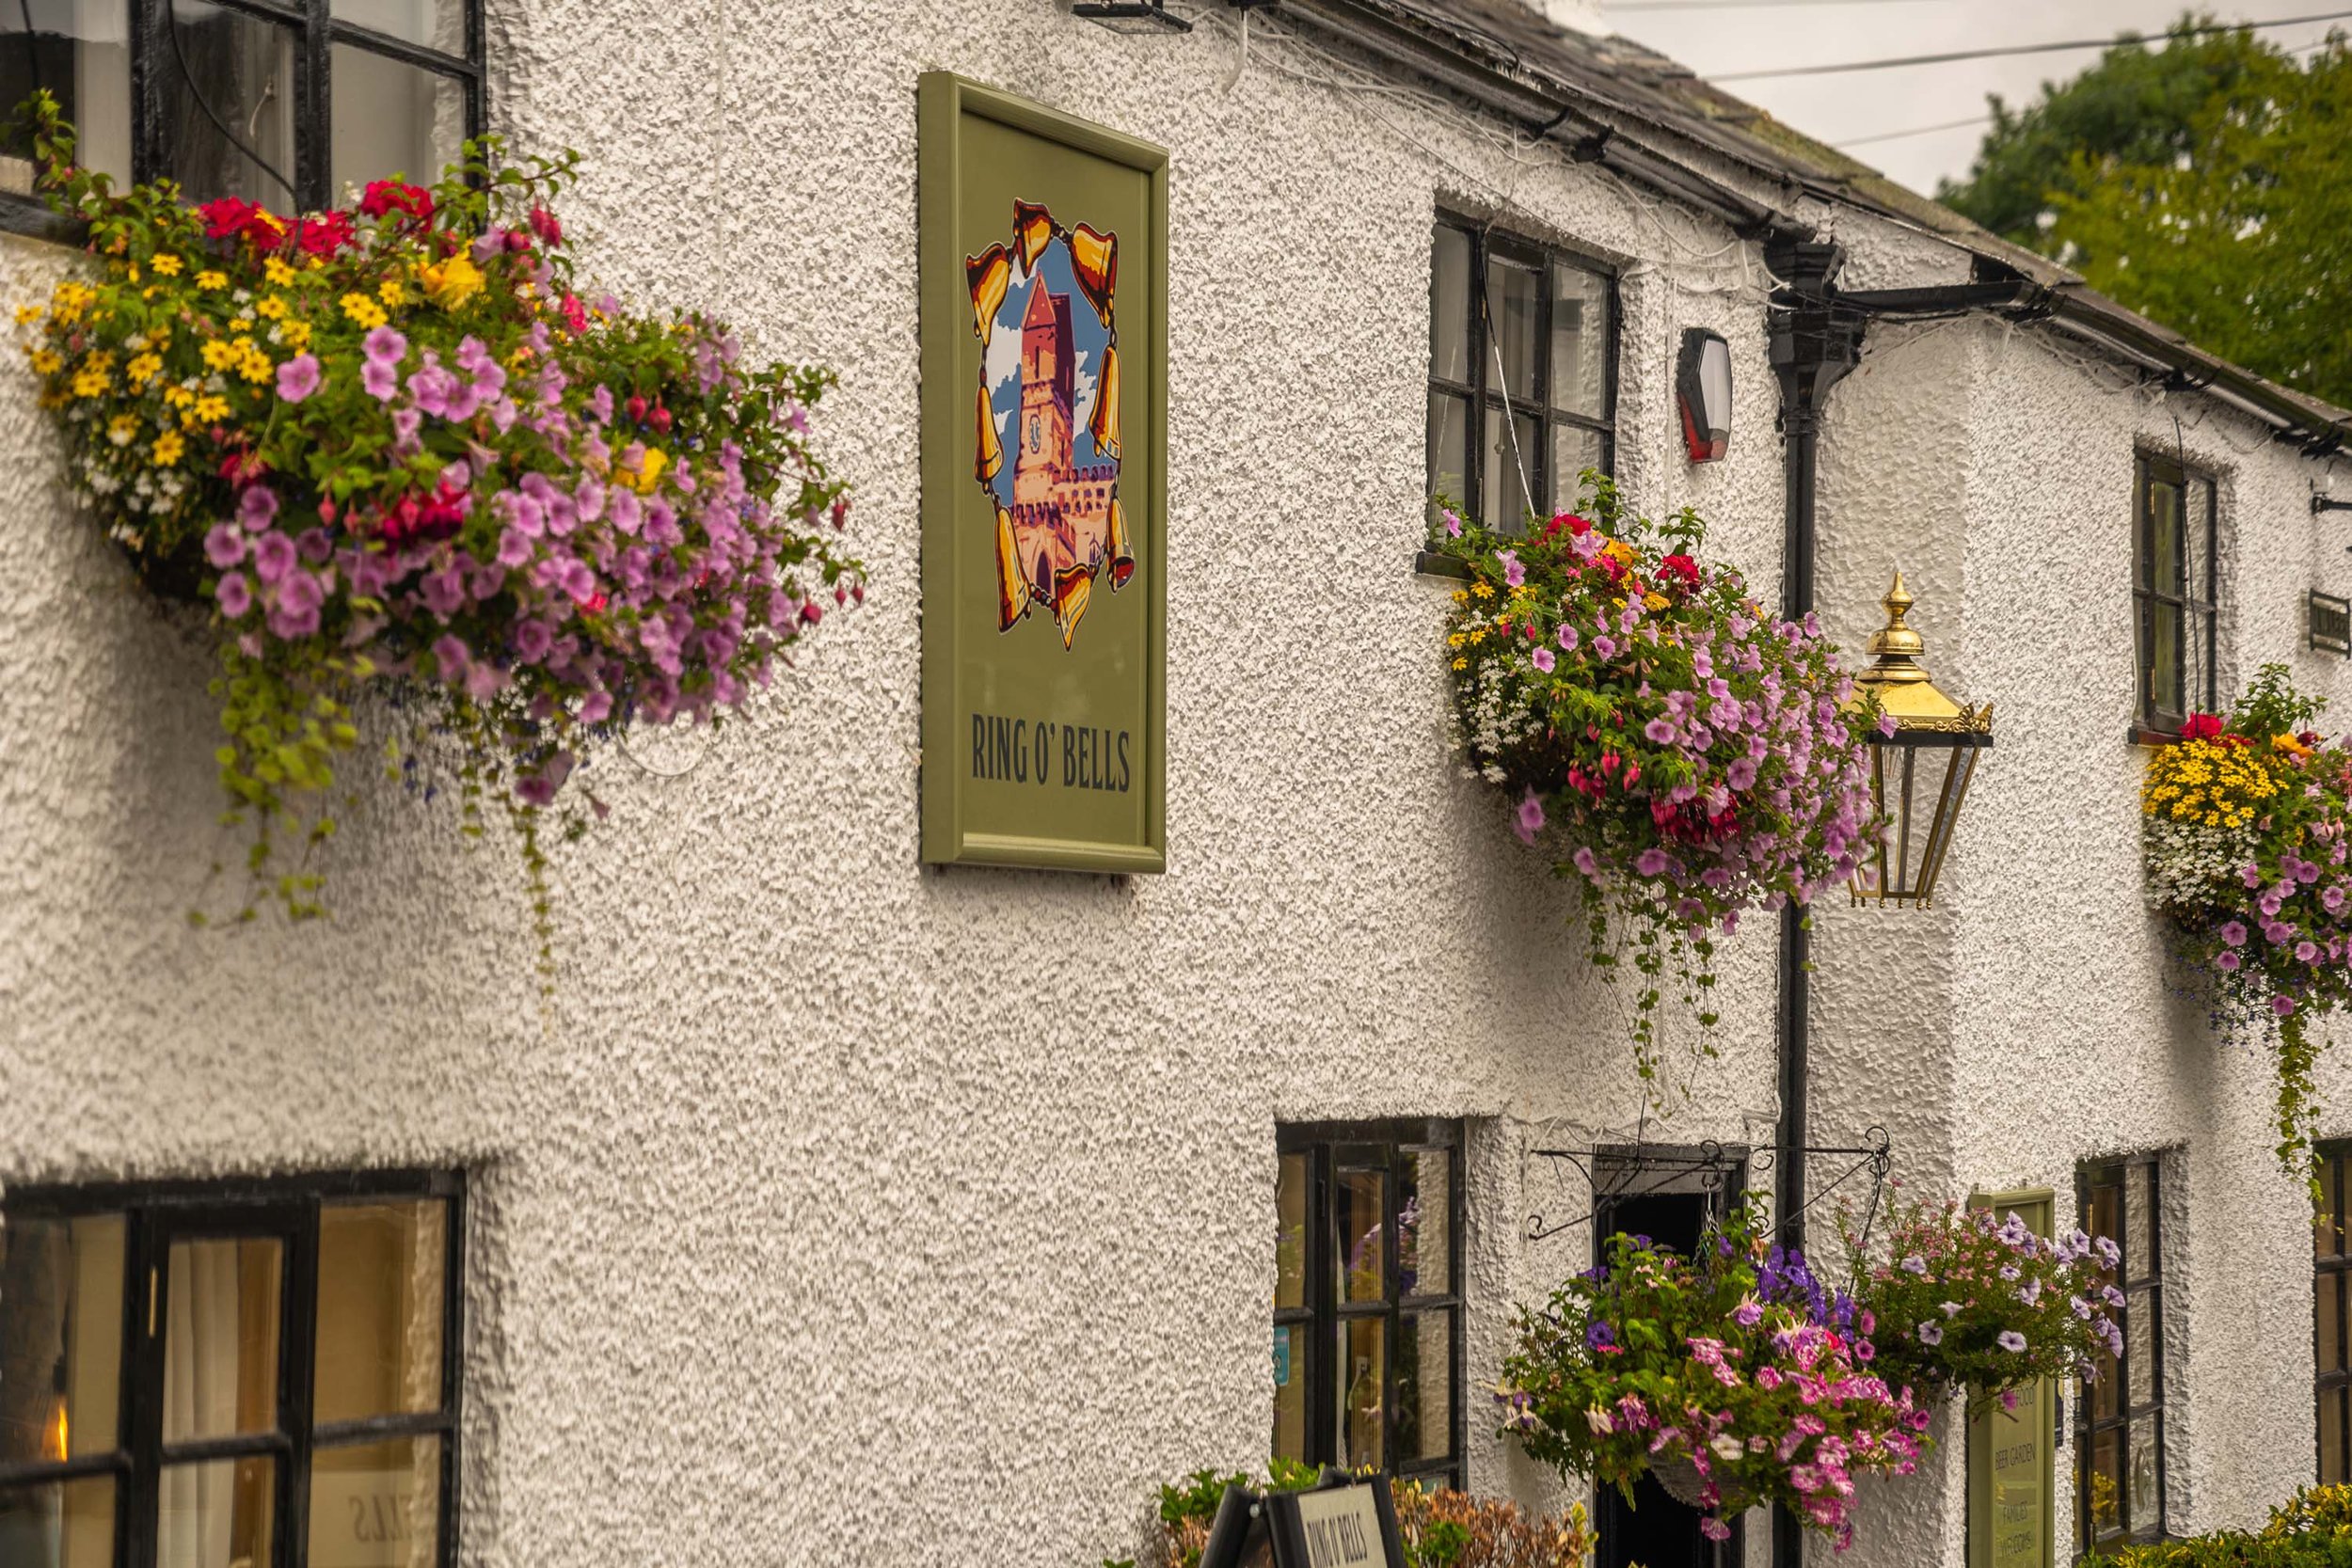 Oh the beautiful old Ring O'Bells Inn 😍 | Ring o bells, Picture, Old rings